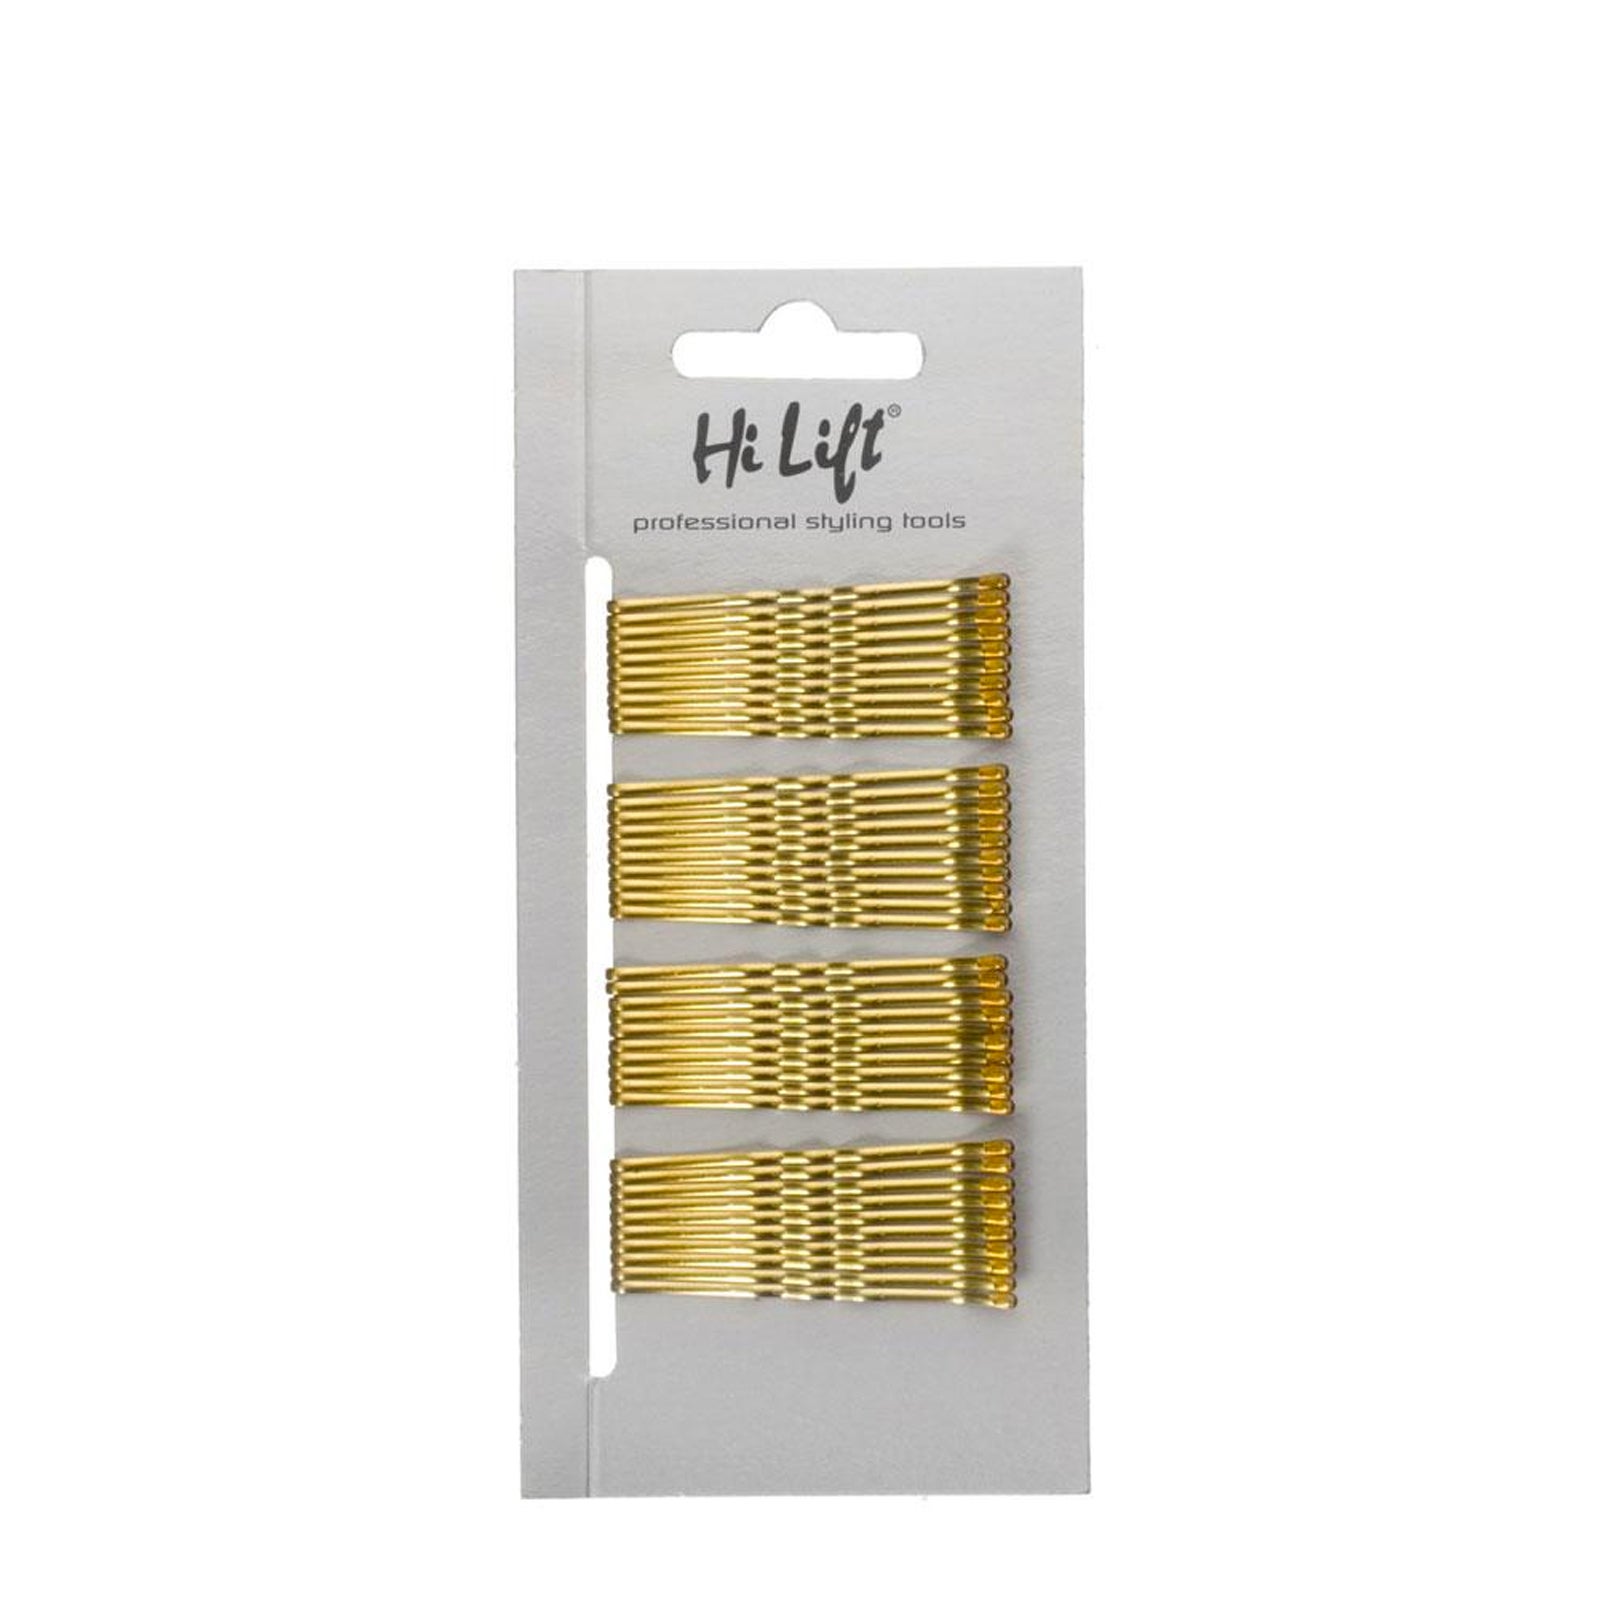 Hi Lift Professional Quality Hair Tie Styling Bobby Pins 2" Gold 40 Per Card